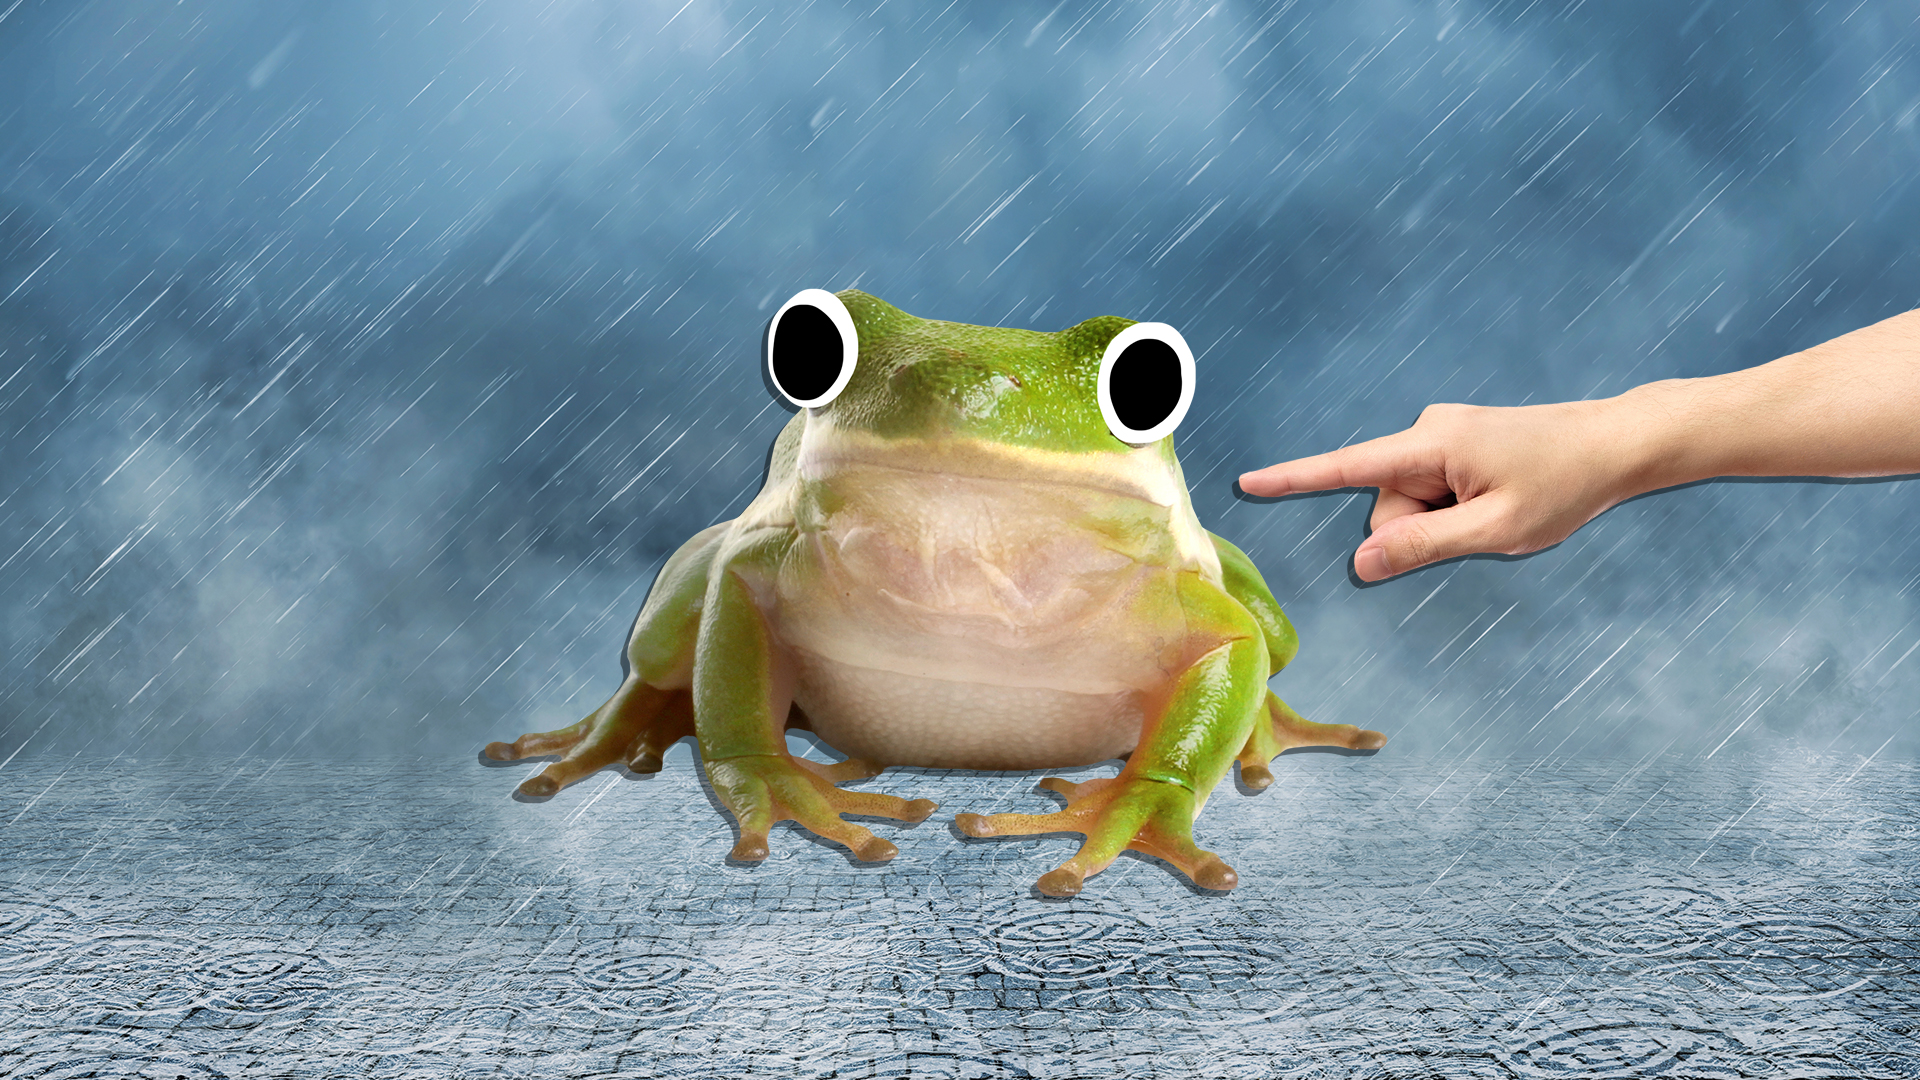 A wet frog